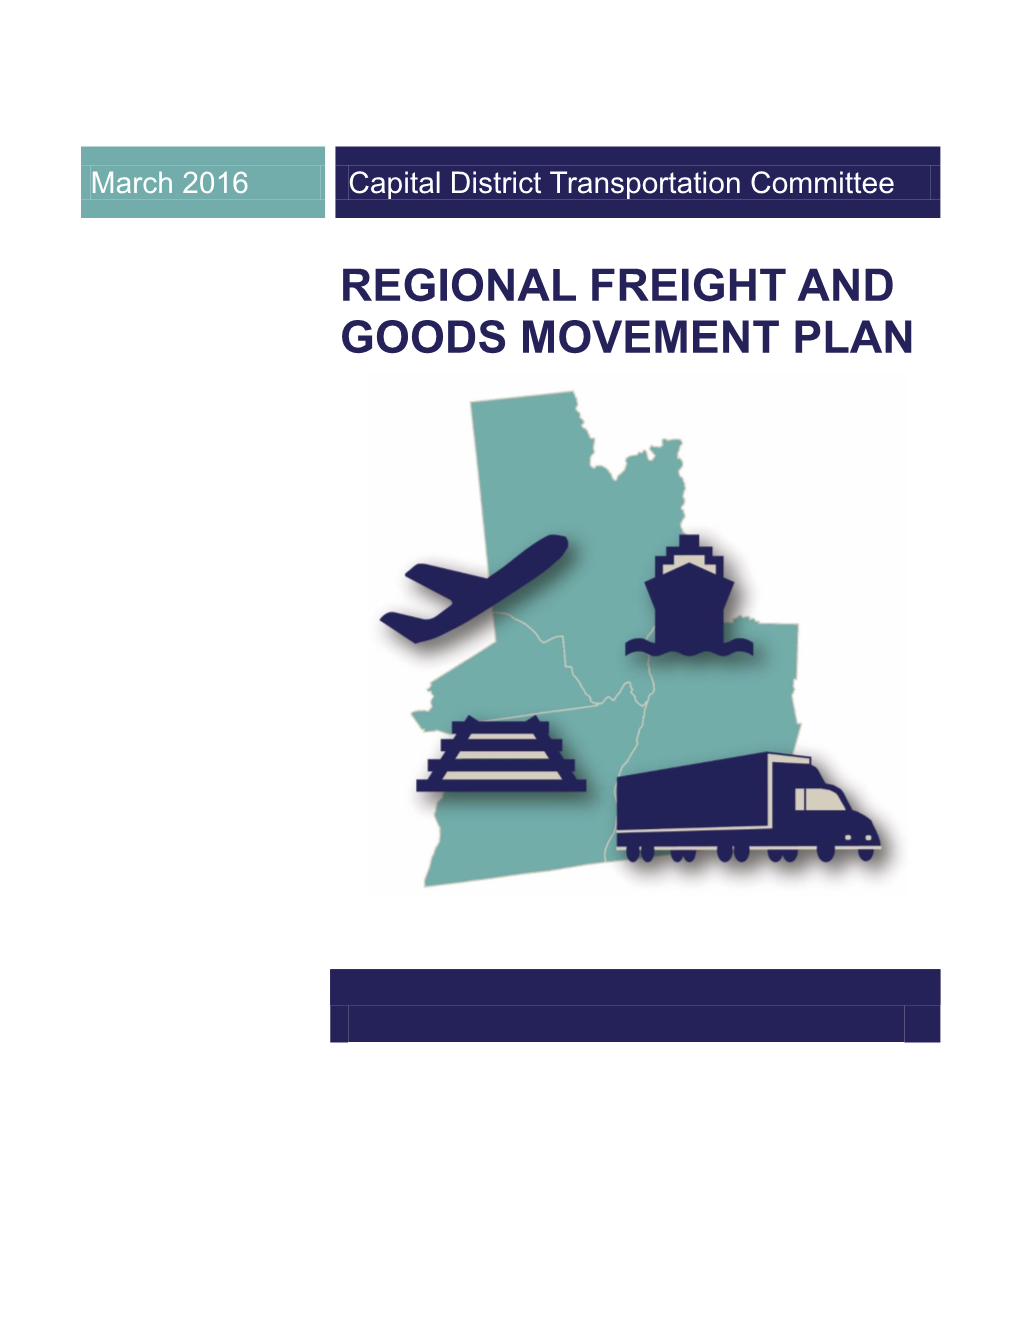 Regional Freight and Goods Movement Plan